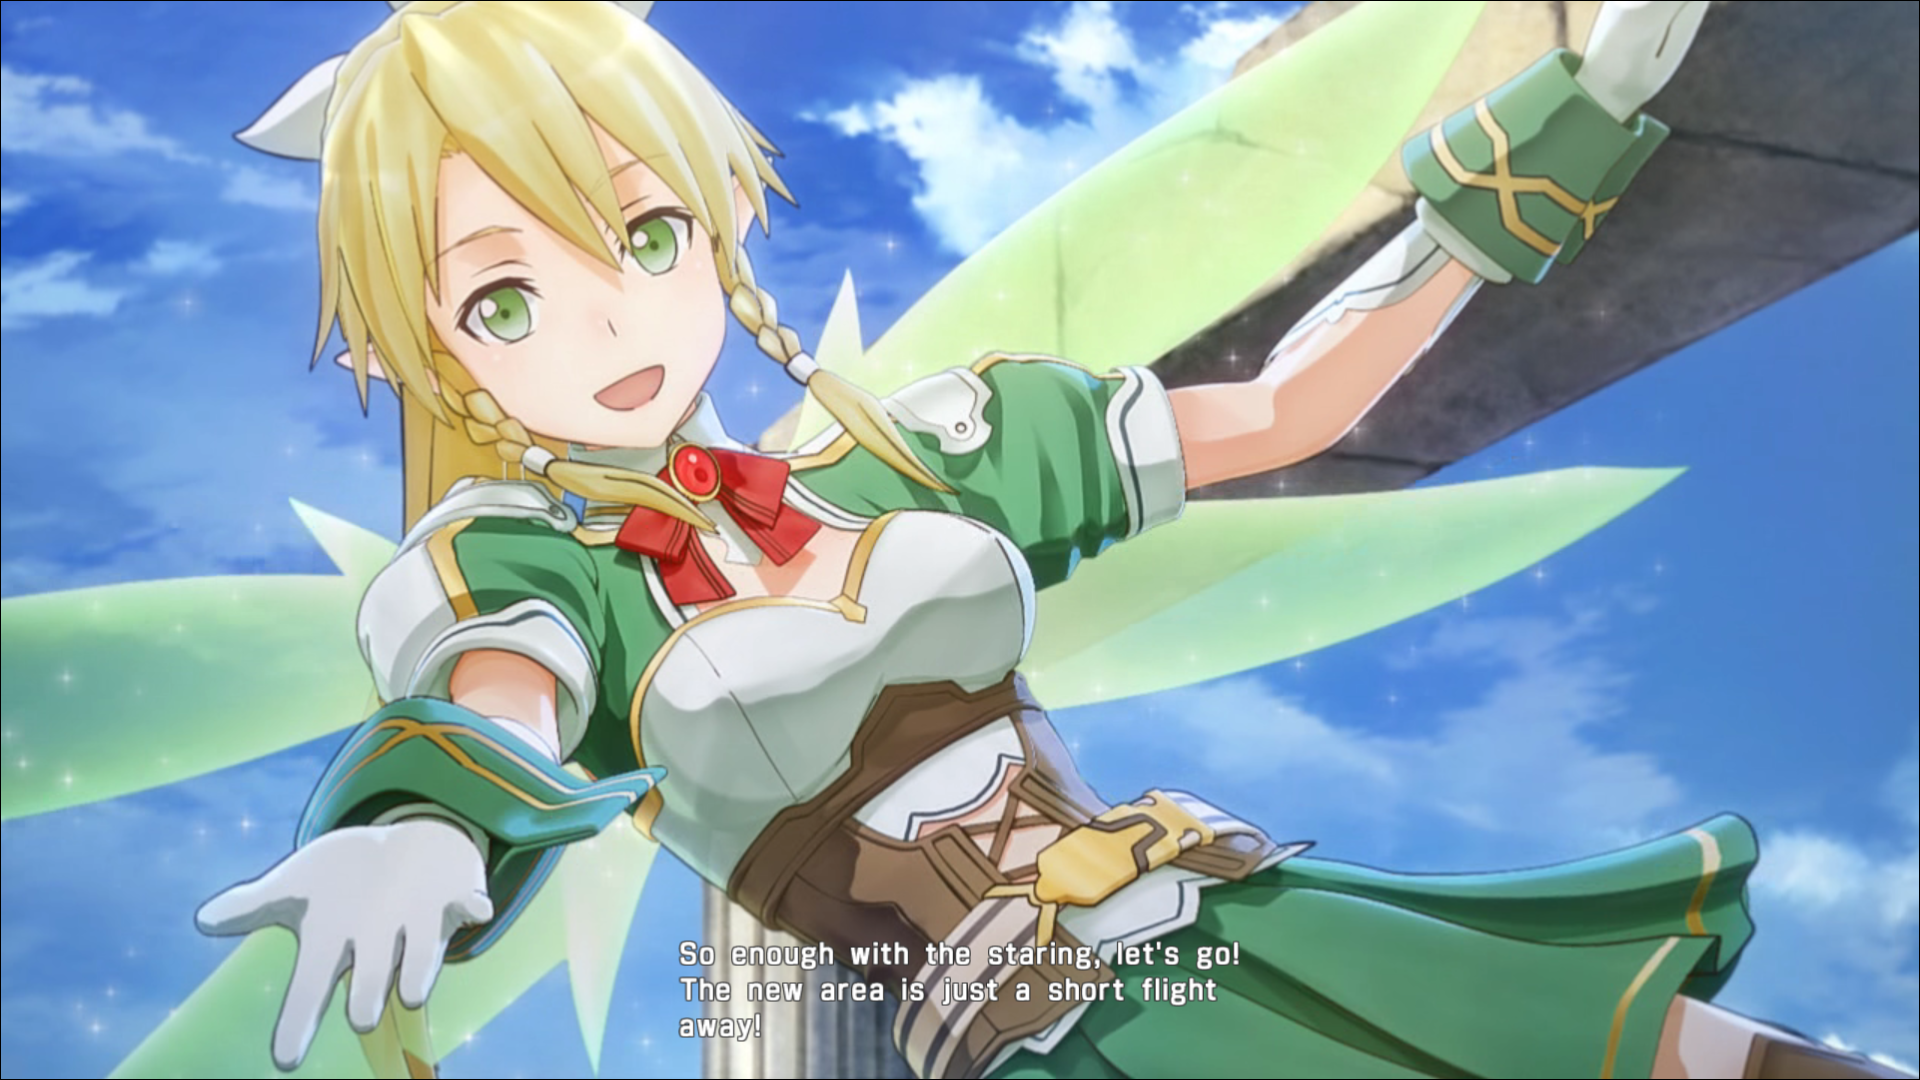 Sword Art Online: Game Director's Edition will include Lost Song